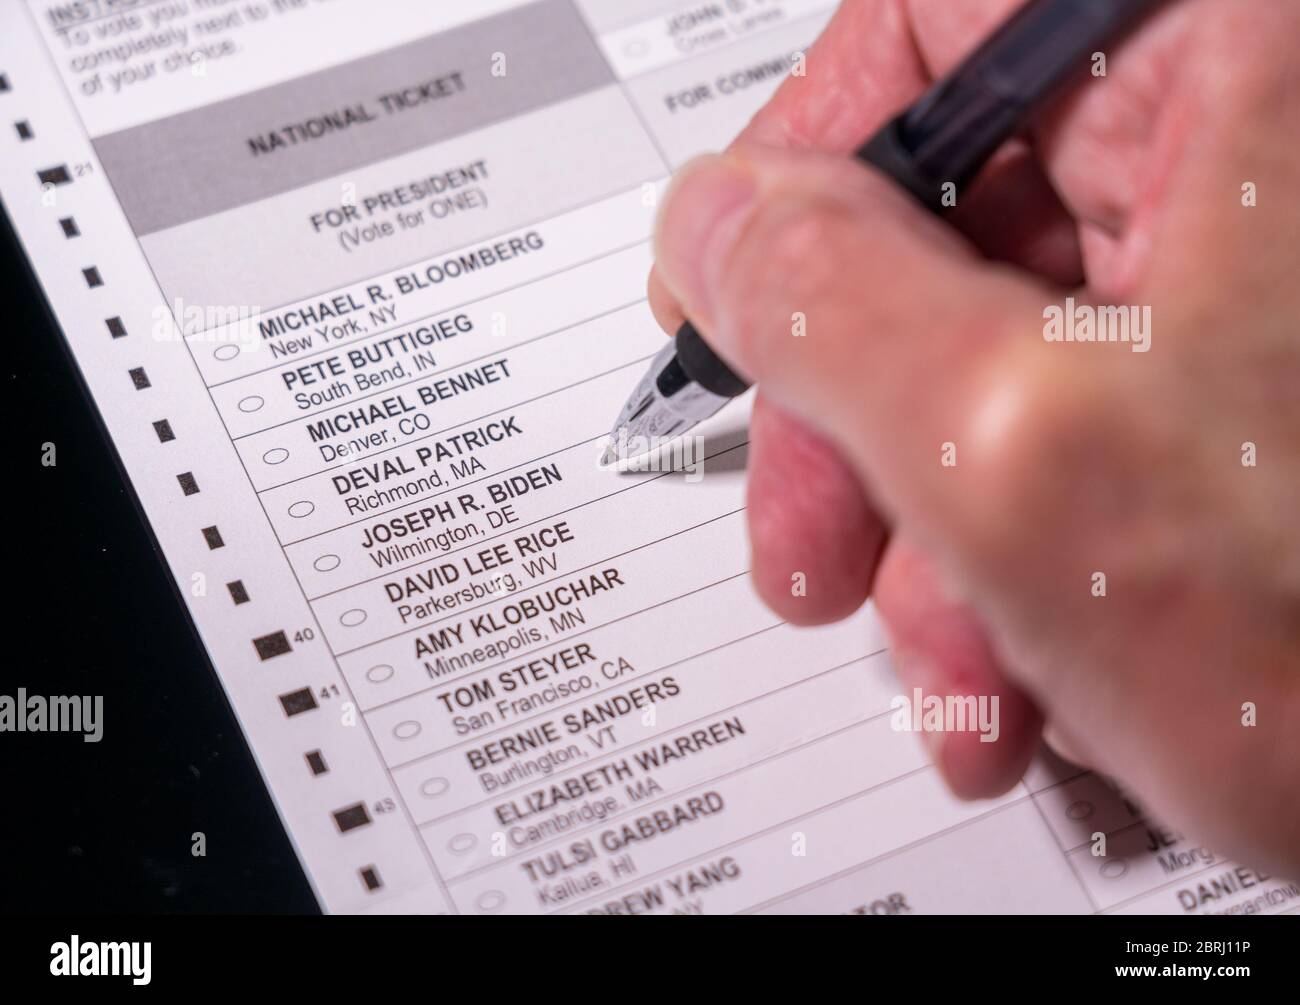 Morgantown, WV - 21 May 2020: Democratic primary election absentee ballot form with hand holding pen for Joe Biden for President Stock Photo